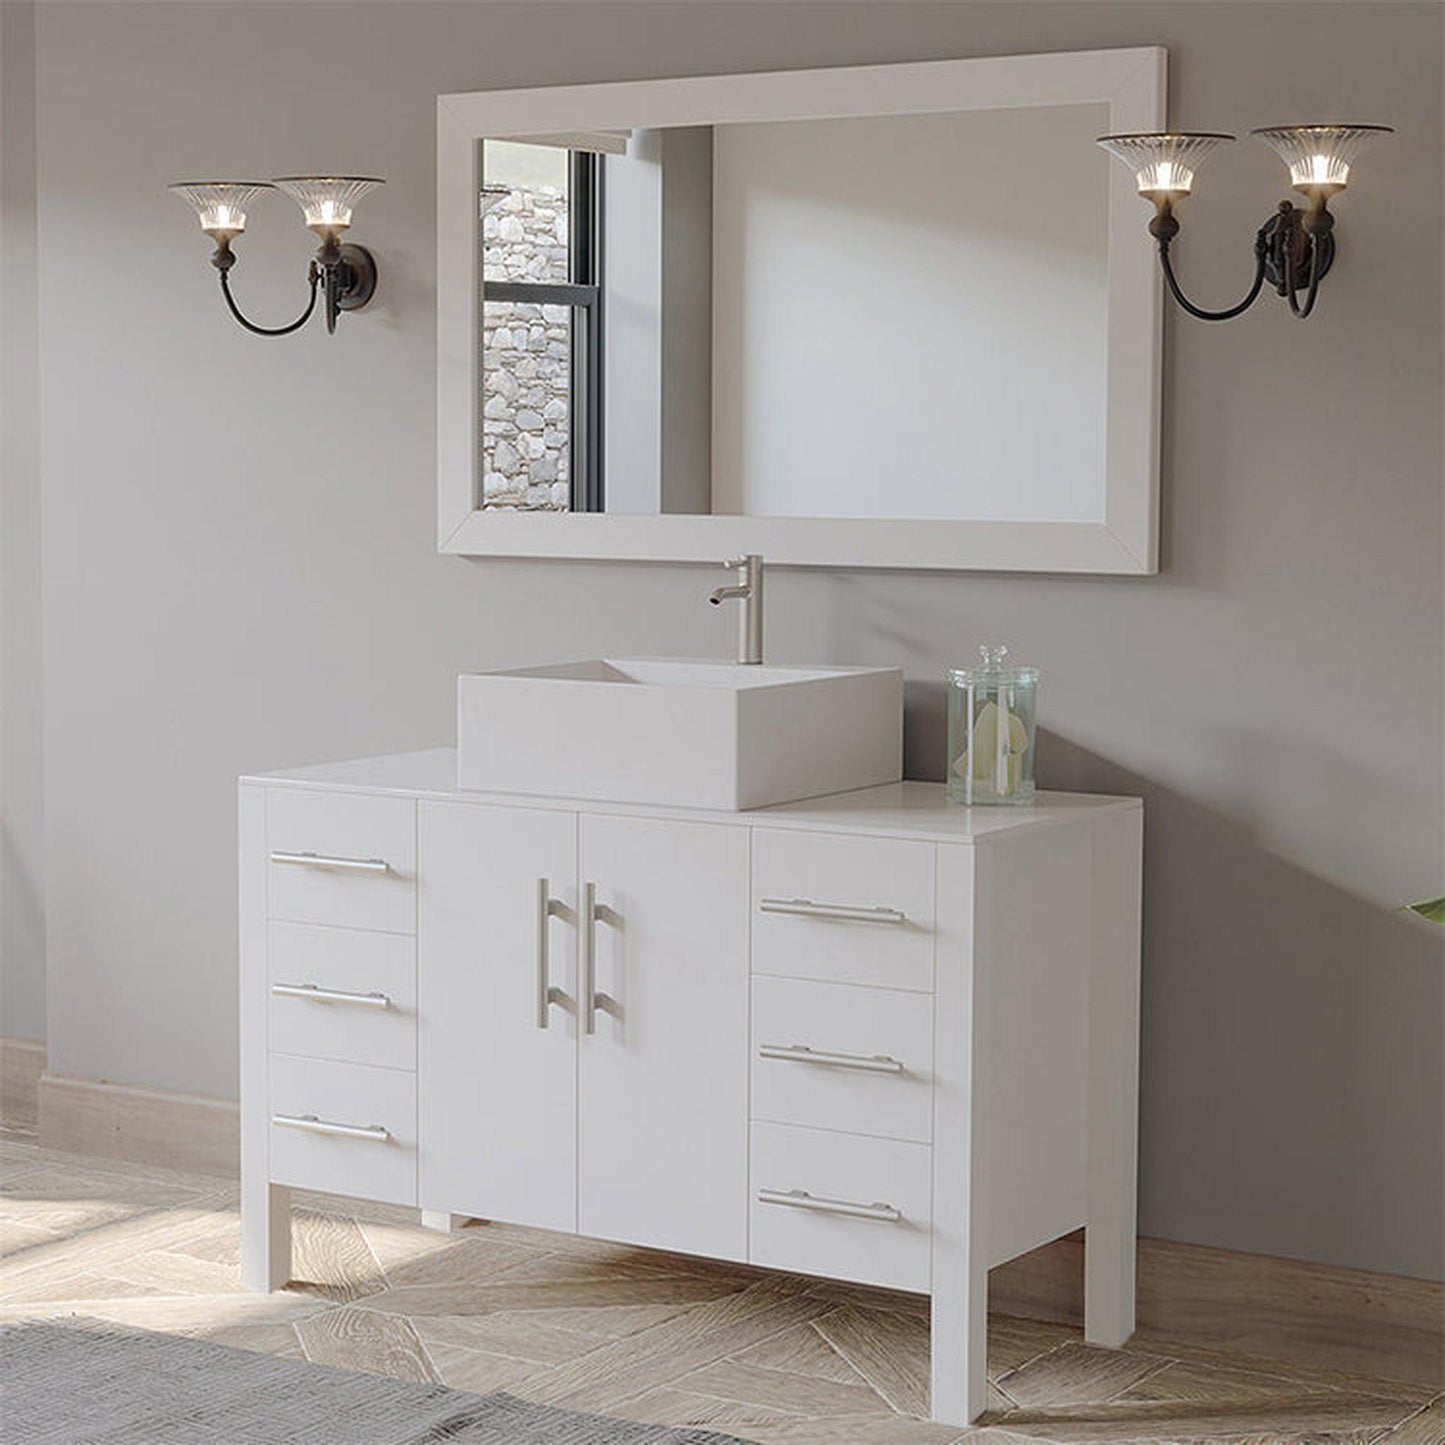 Cambridge Plumbing 48" White Wood Single Vanity Set With Porcelain Countertop And Square Vessel Sink With Faucet Hole And Brushed Nickel Plumbing Finish